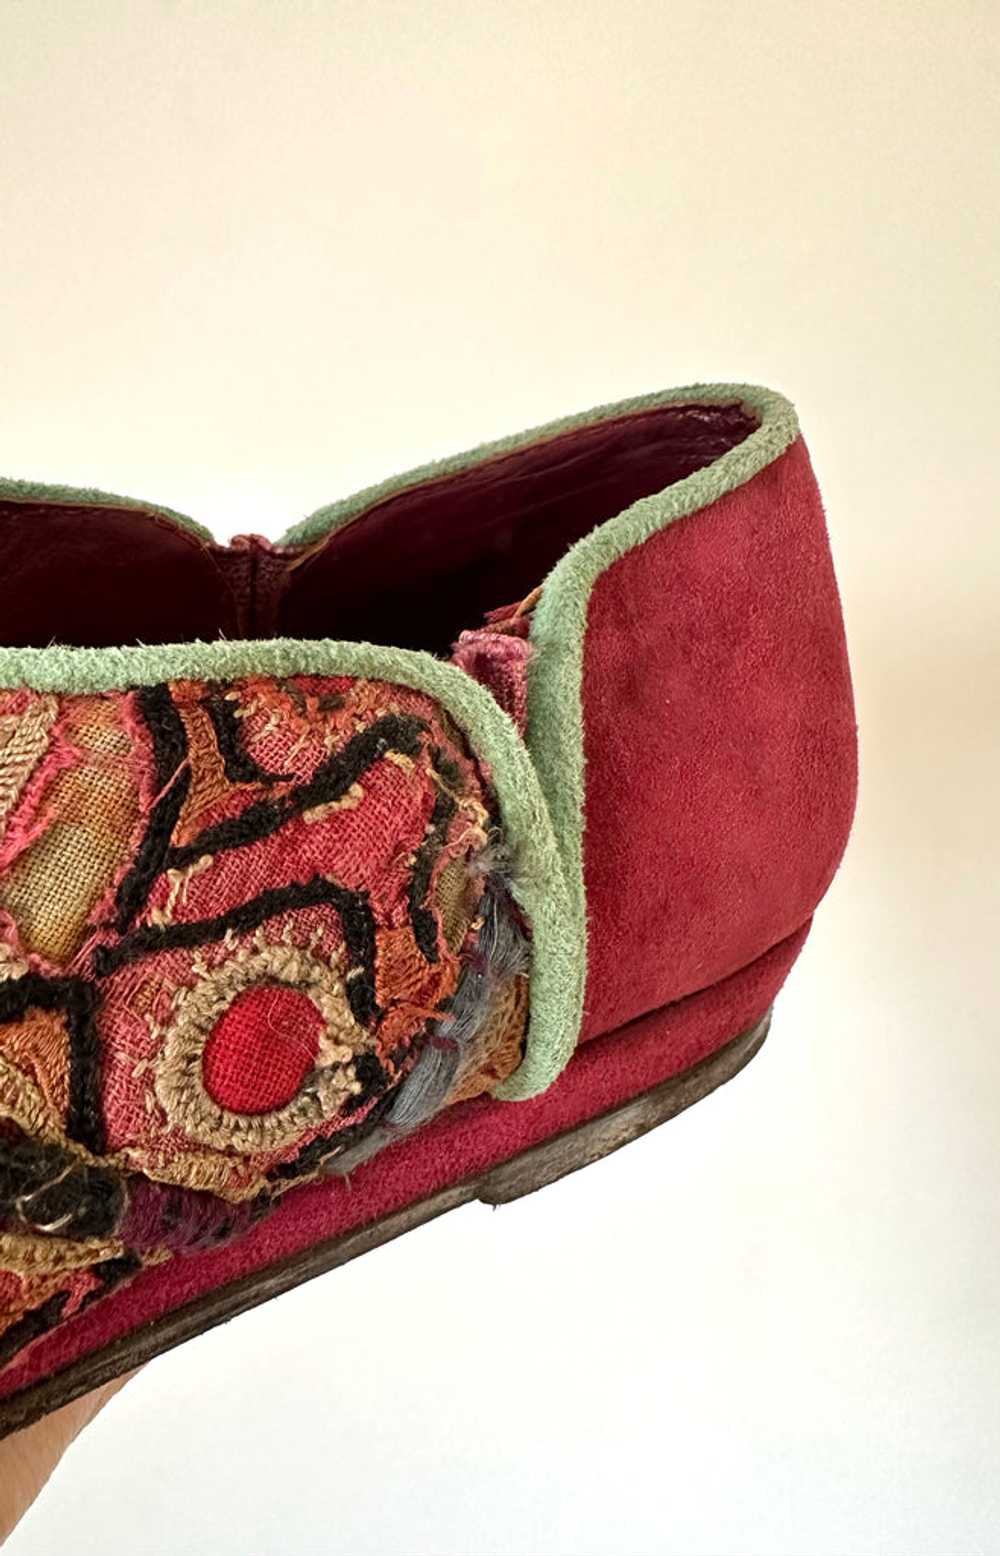 Embroidered Shoes / 1980s / Wounded Birds - image 7